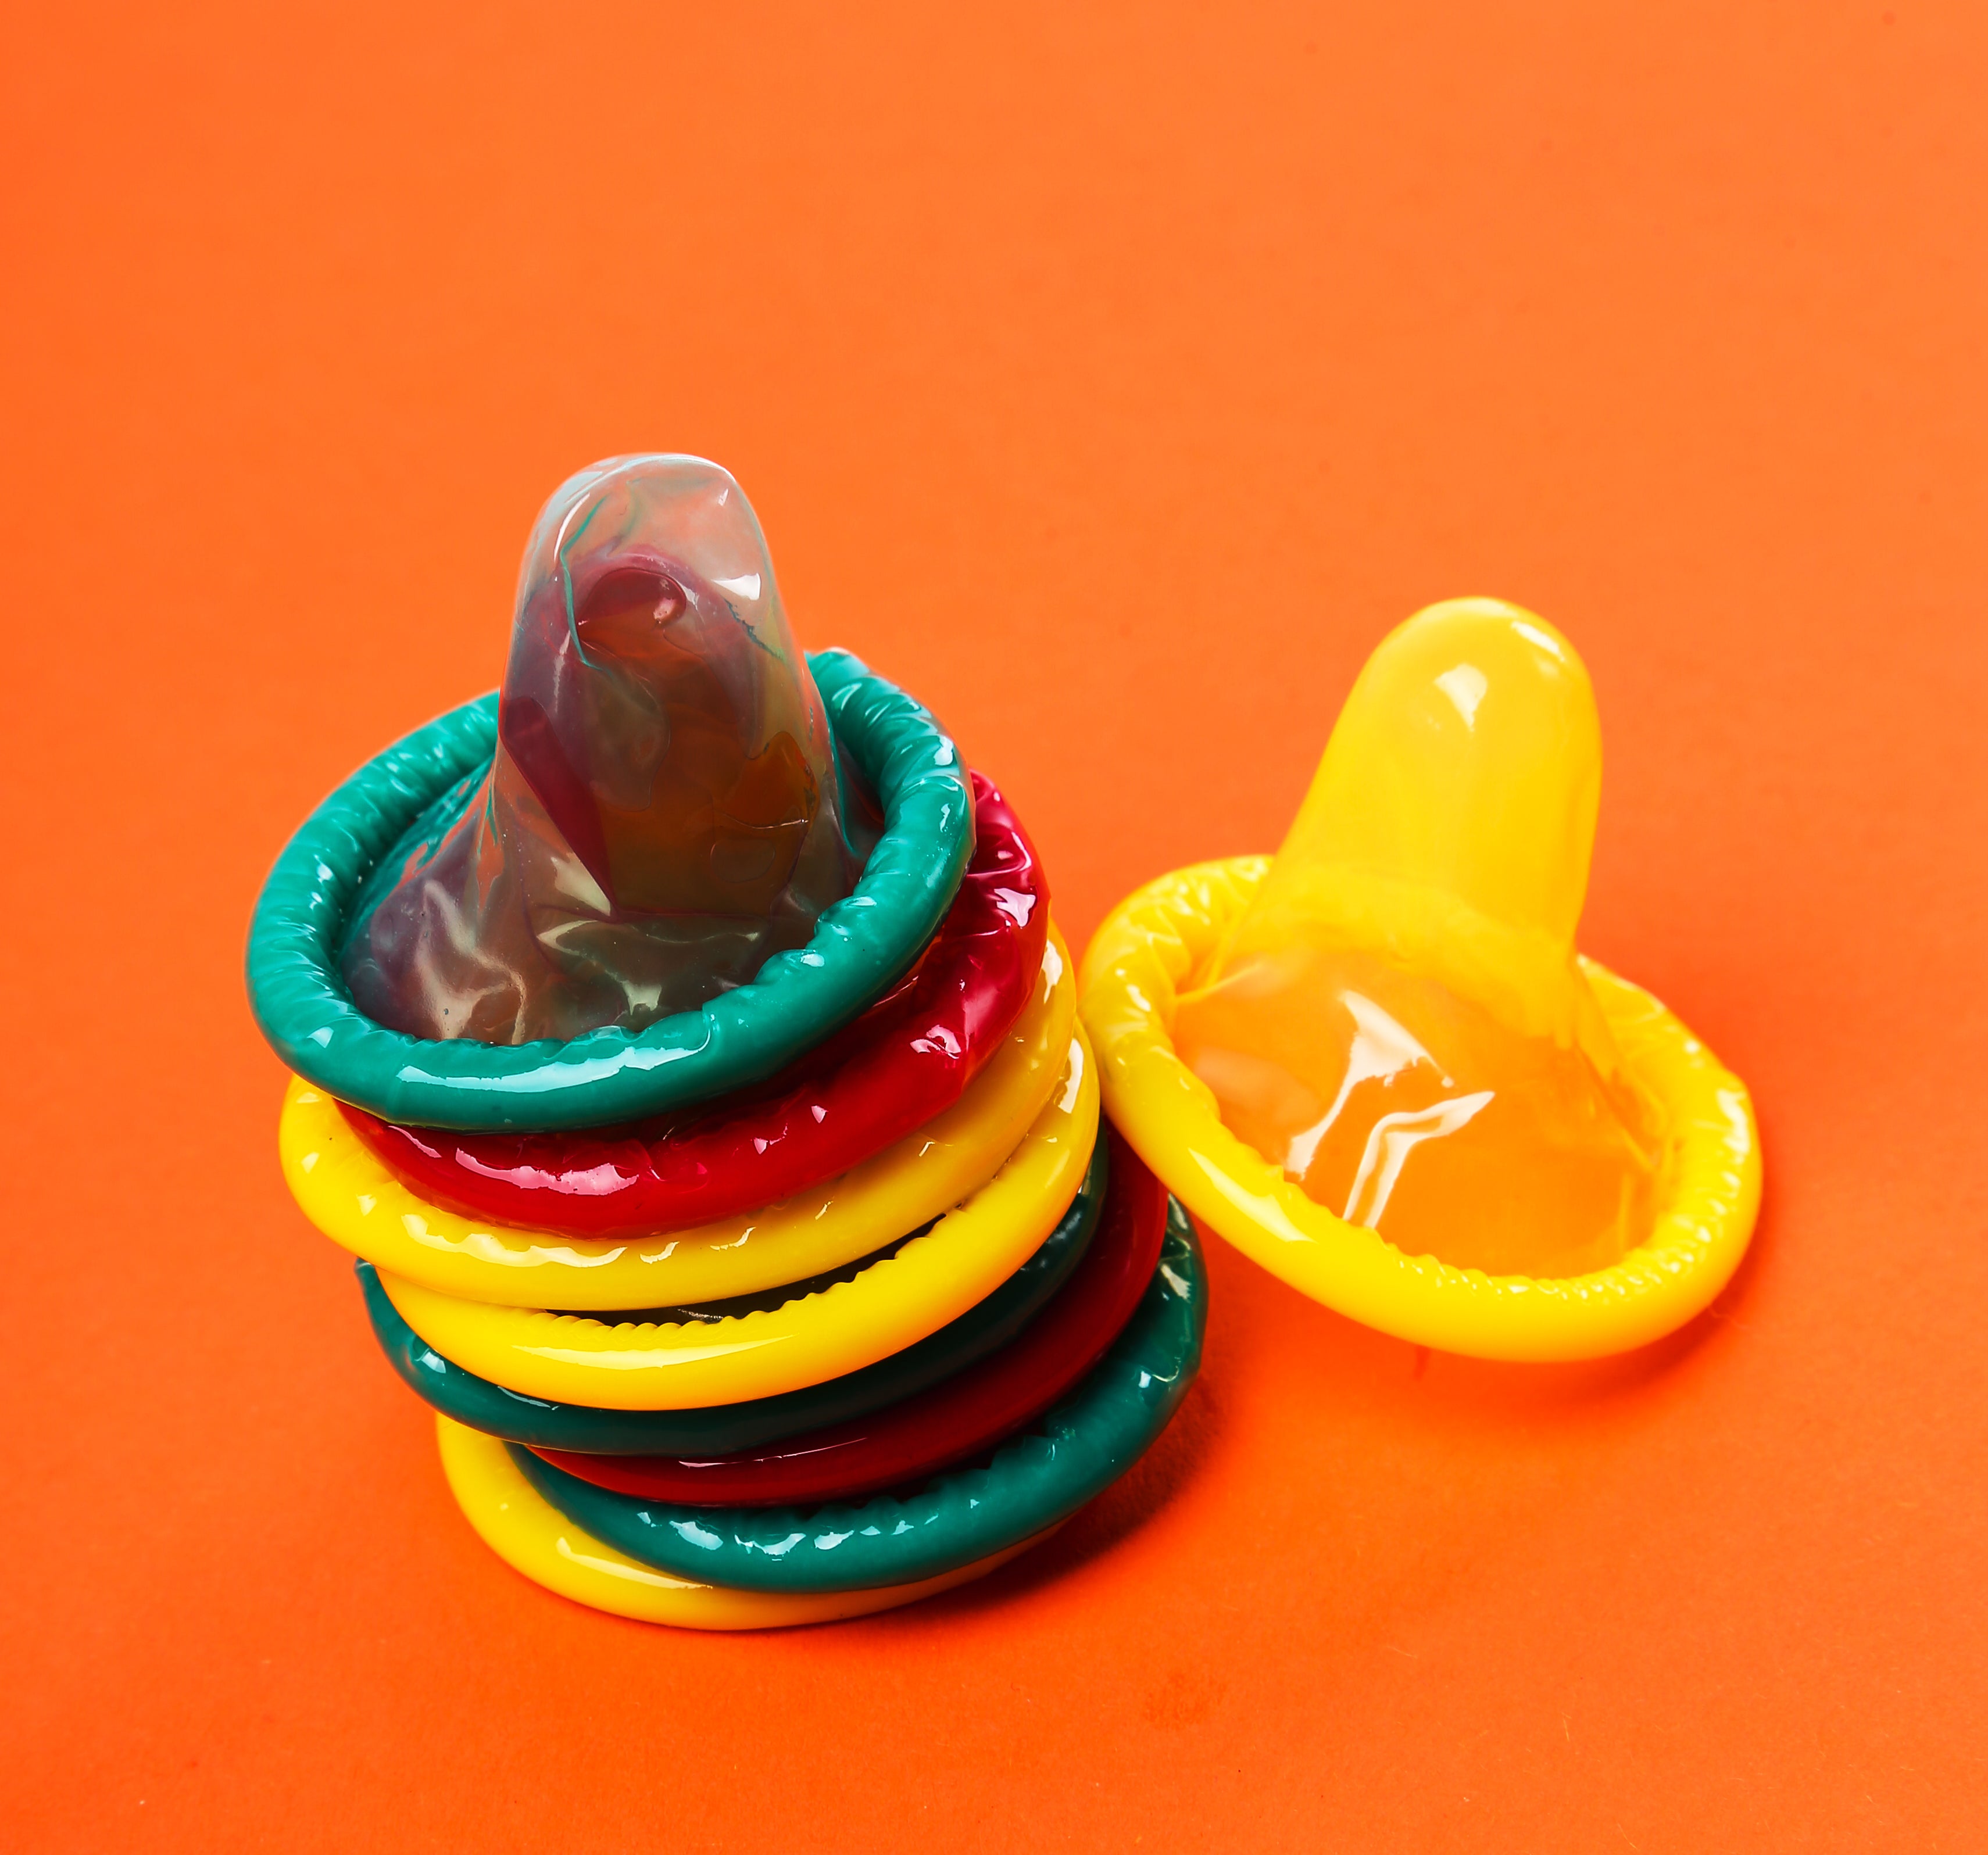 Condoms are the most accessible and practical tools for practising safe sex and for preventing unwanted pregnancies and sexually transmitted infections.